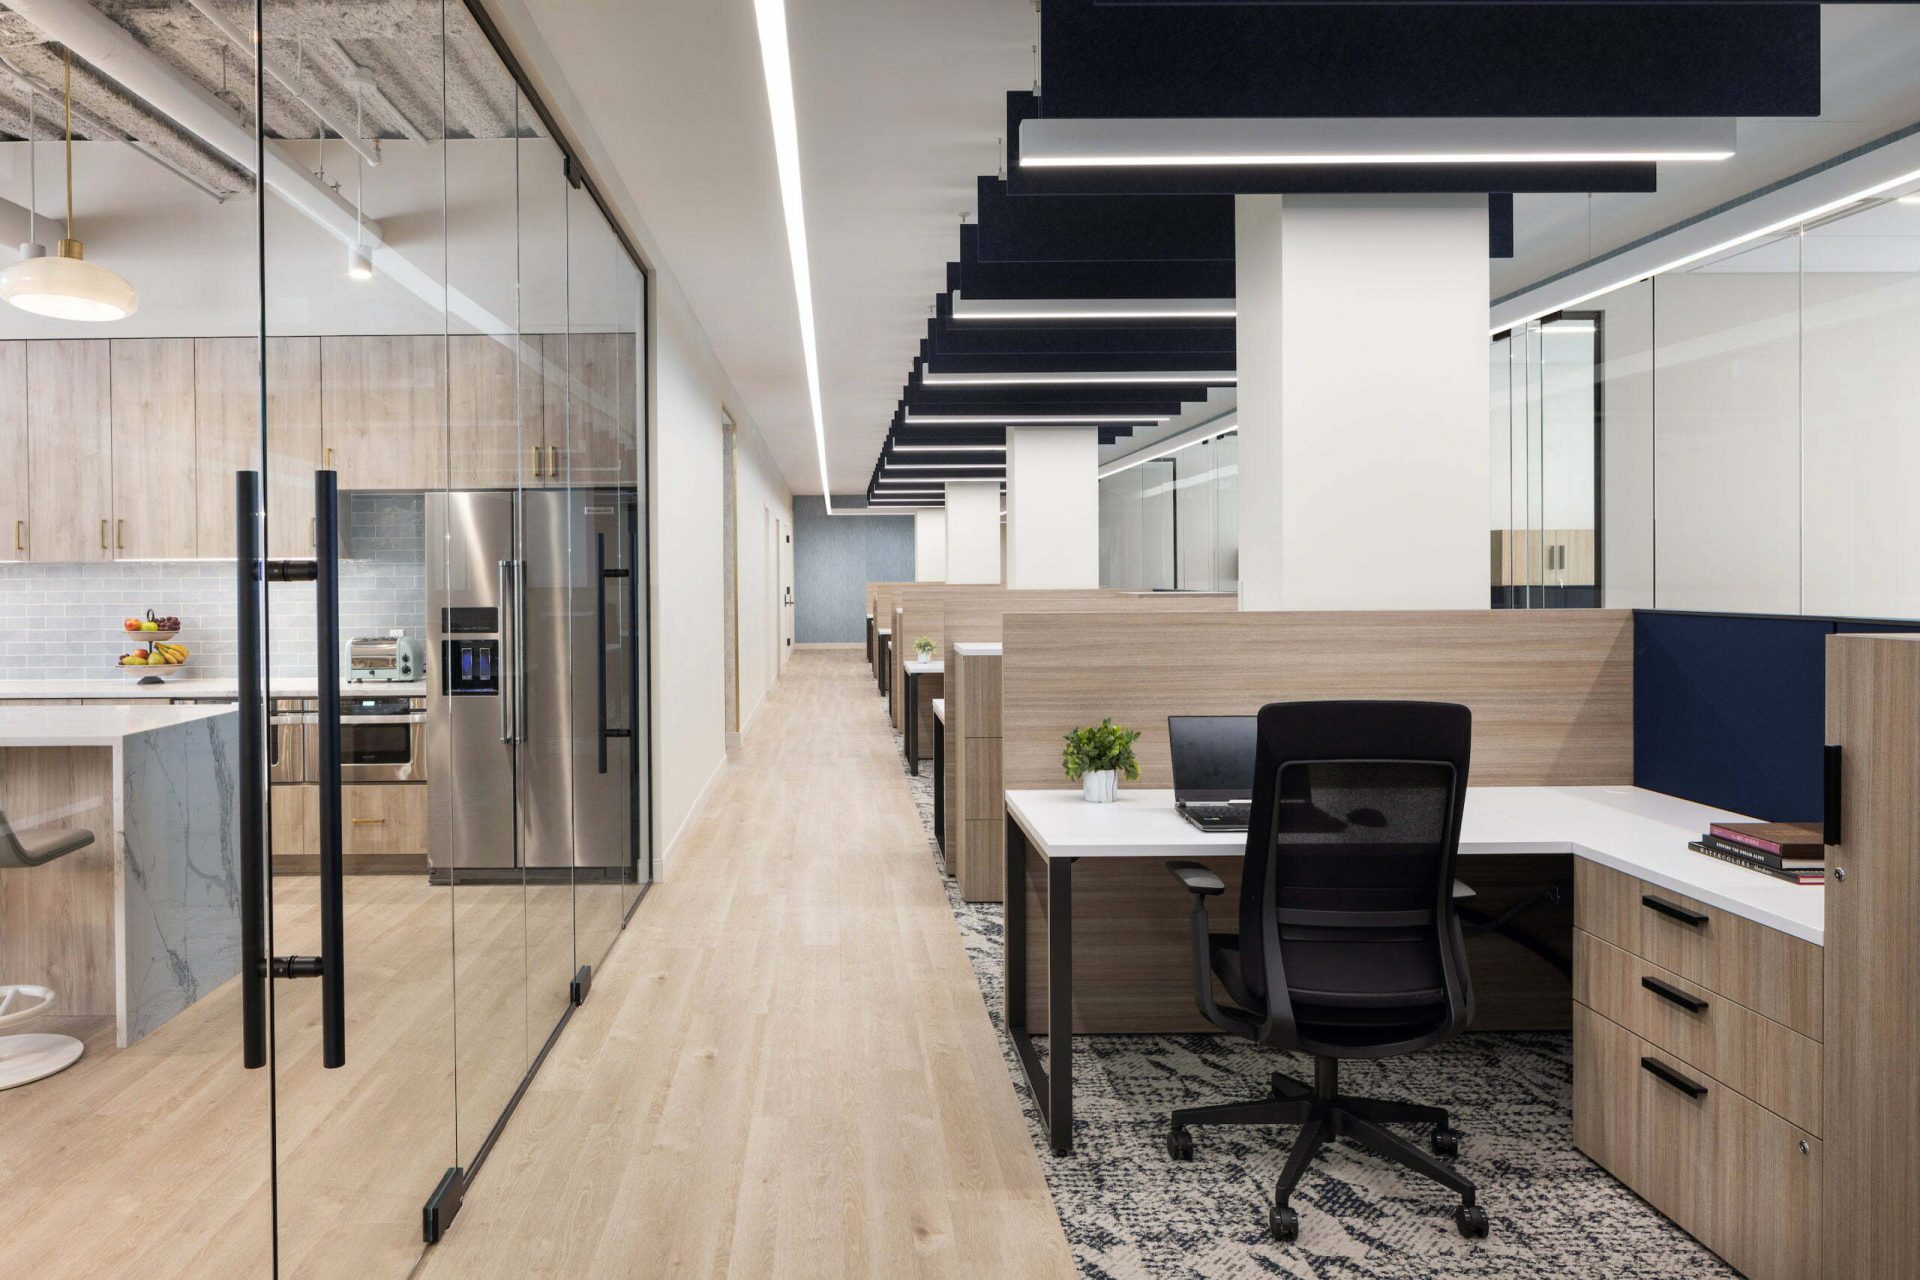 Office cubicles lined with glass partitioned offices